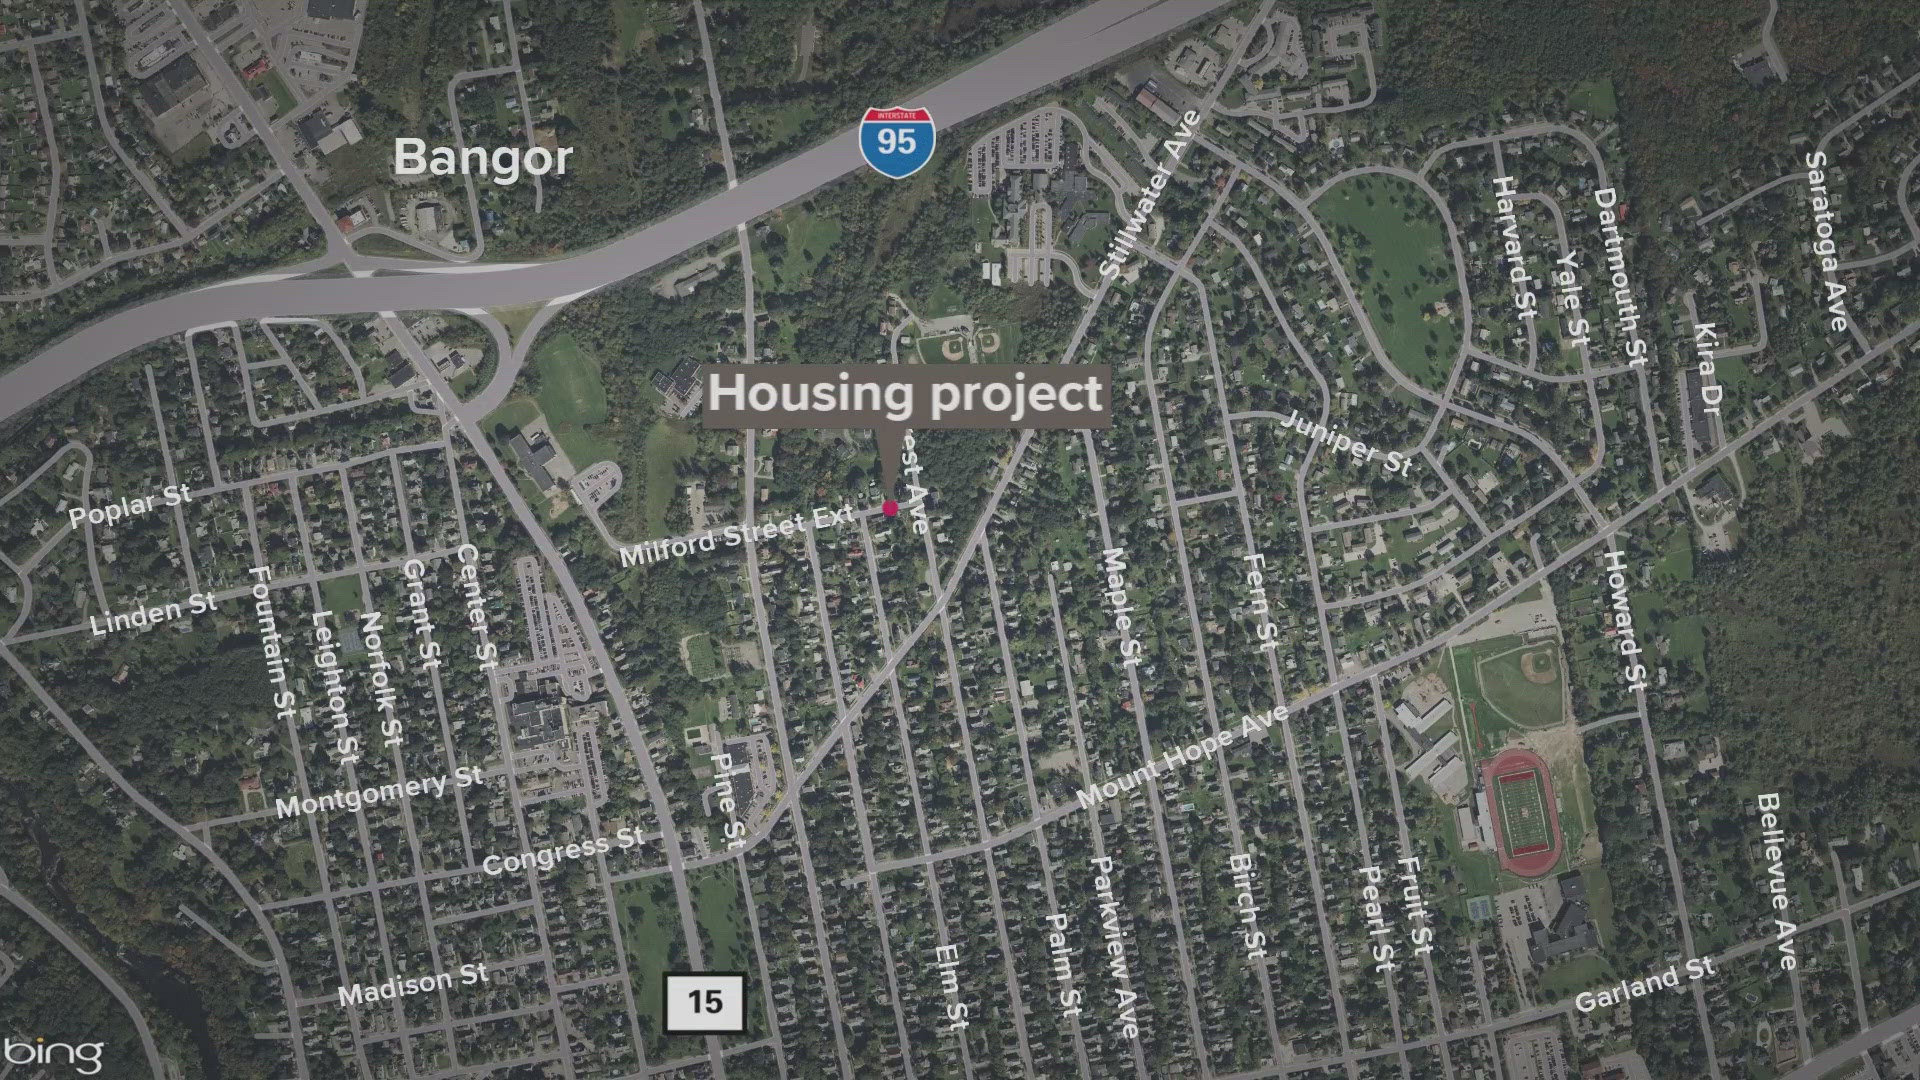 City leaders say the affordable housing project will be built on Milford Street and will habe about 40 units.